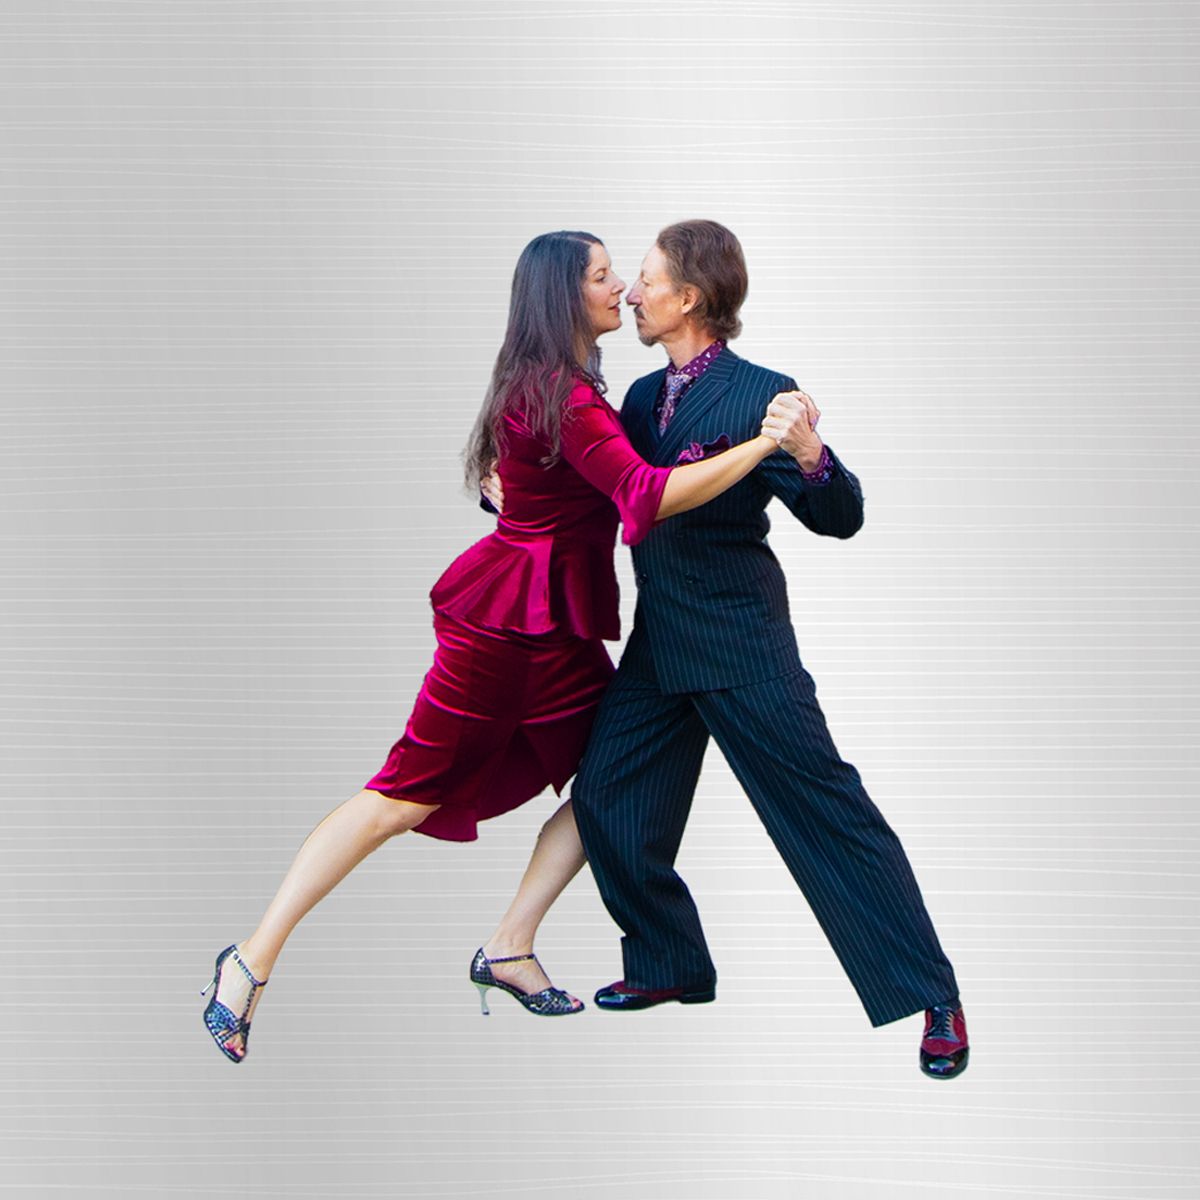 Marcelo Solis dancing Argentine Tango with Mimi - Chrome background